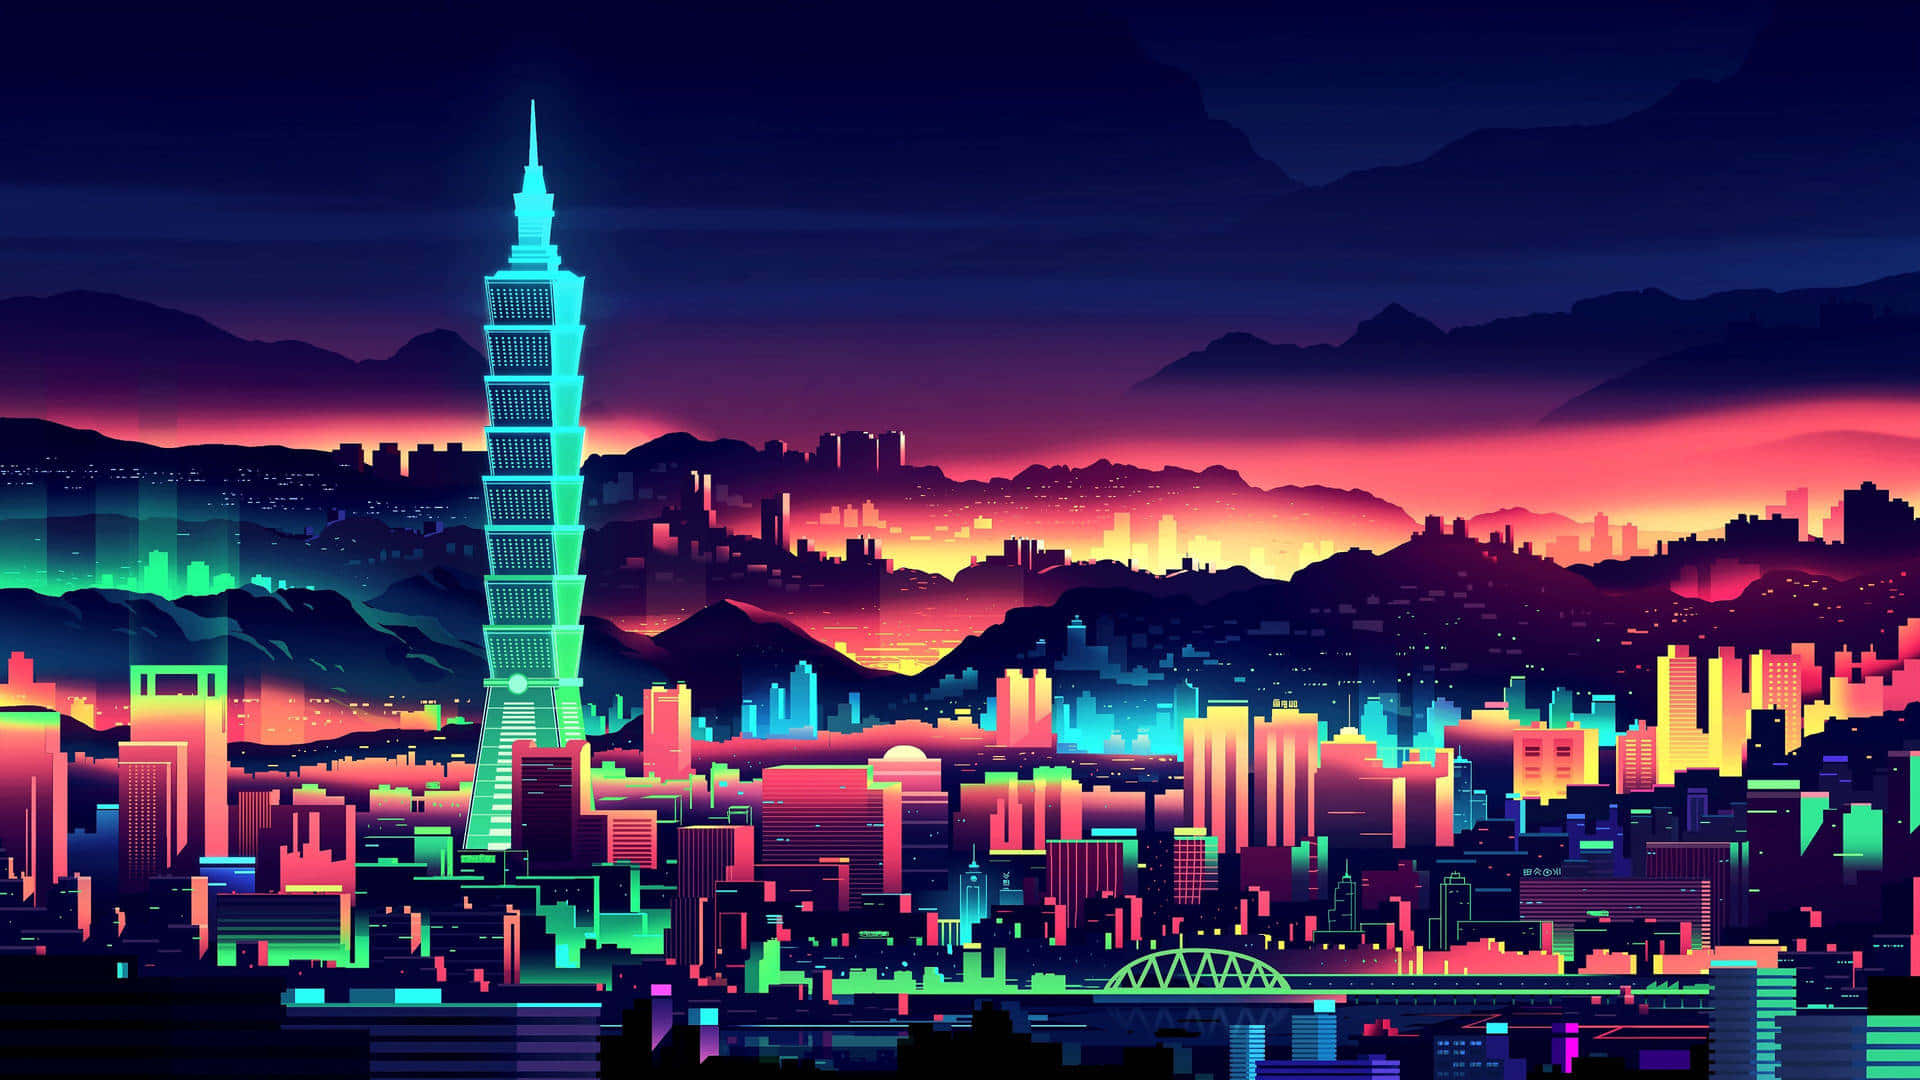 "Welcome to Synthwave City - a Futuristic Landscapes of Neon Lights and Bold Colors" Wallpaper